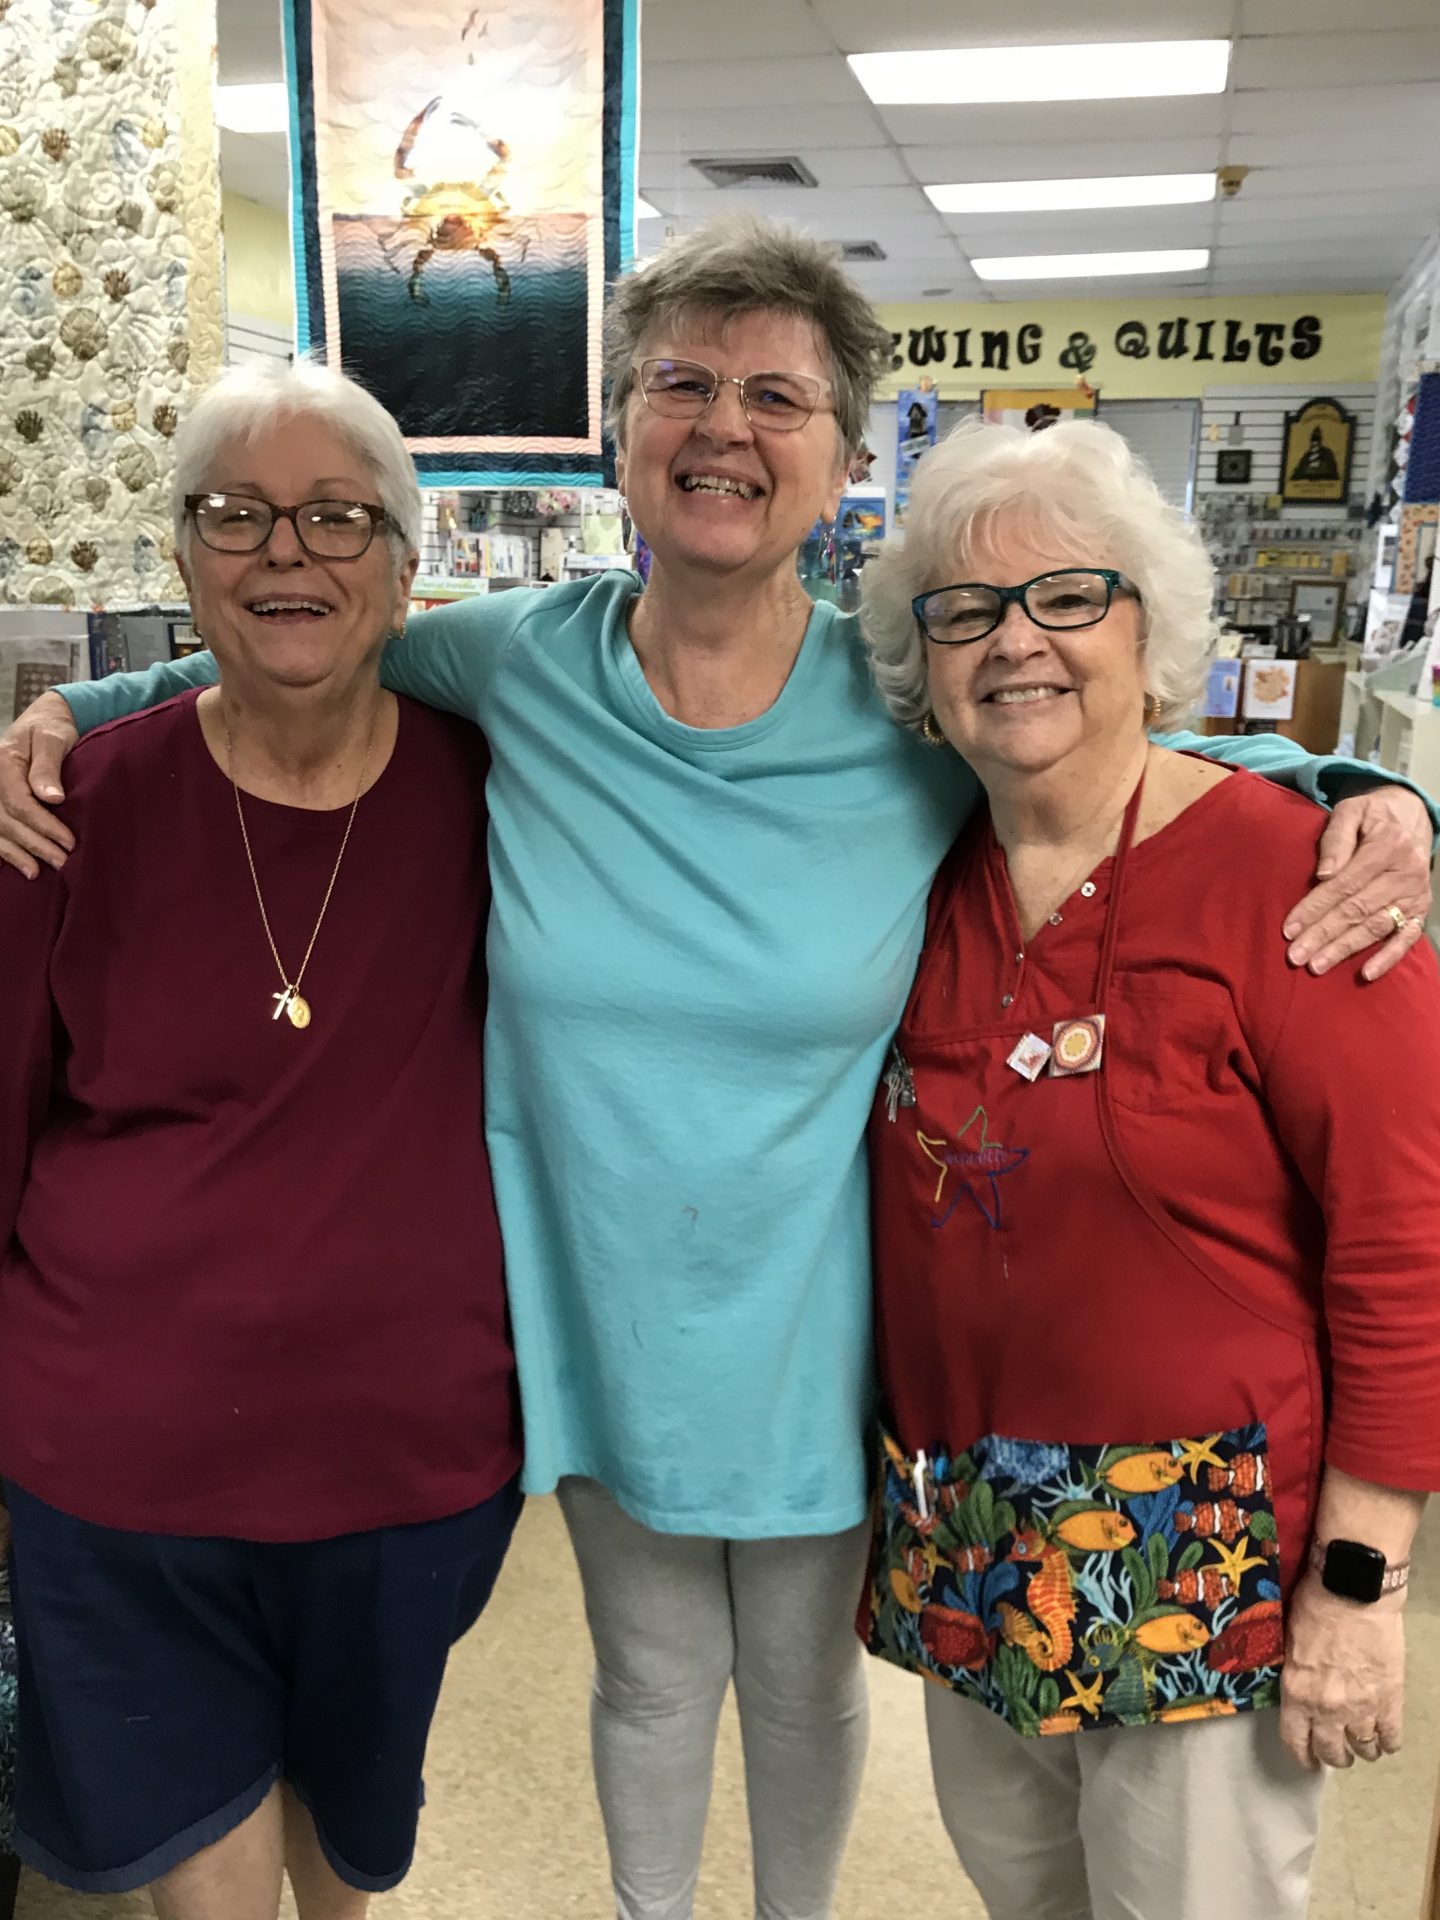 The "Three Amigos" from Seaside Sewing & Quilts.